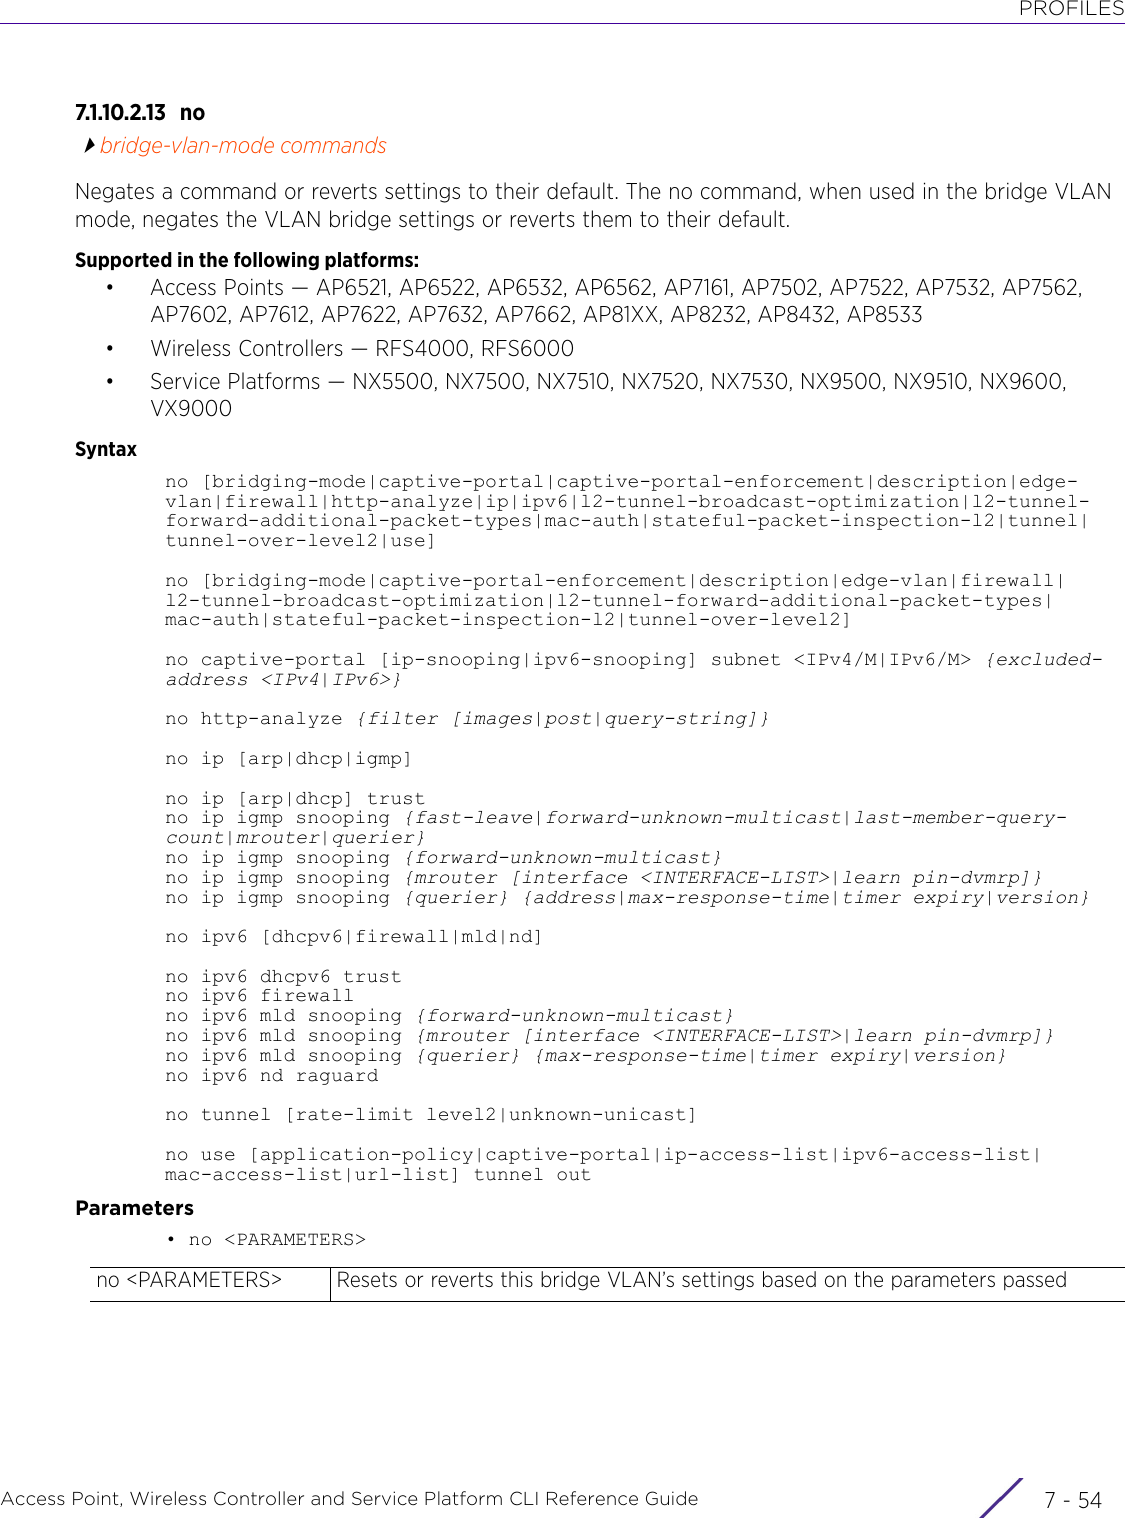 PROFILESAccess Point, Wireless Controller and Service Platform CLI Reference Guide  7 - 547.1.10.2.13 nobridge-vlan-mode commandsNegates a command or reverts settings to their default. The no command, when used in the bridge VLAN mode, negates the VLAN bridge settings or reverts them to their default.Supported in the following platforms:• Access Points — AP6521, AP6522, AP6532, AP6562, AP7161, AP7502, AP7522, AP7532, AP7562, AP7602, AP7612, AP7622, AP7632, AP7662, AP81XX, AP8232, AP8432, AP8533• Wireless Controllers — RFS4000, RFS6000• Service Platforms — NX5500, NX7500, NX7510, NX7520, NX7530, NX9500, NX9510, NX9600, VX9000Syntaxno [bridging-mode|captive-portal|captive-portal-enforcement|description|edge-vlan|firewall|http-analyze|ip|ipv6|l2-tunnel-broadcast-optimization|l2-tunnel-forward-additional-packet-types|mac-auth|stateful-packet-inspection-l2|tunnel|tunnel-over-level2|use]no [bridging-mode|captive-portal-enforcement|description|edge-vlan|firewall|l2-tunnel-broadcast-optimization|l2-tunnel-forward-additional-packet-types|mac-auth|stateful-packet-inspection-l2|tunnel-over-level2]no captive-portal [ip-snooping|ipv6-snooping] subnet &lt;IPv4/M|IPv6/M&gt; {excluded-address &lt;IPv4|IPv6&gt;}no http-analyze {filter [images|post|query-string]}no ip [arp|dhcp|igmp]no ip [arp|dhcp] trustno ip igmp snooping {fast-leave|forward-unknown-multicast|last-member-query-count|mrouter|querier}no ip igmp snooping {forward-unknown-multicast}no ip igmp snooping {mrouter [interface &lt;INTERFACE-LIST&gt;|learn pin-dvmrp]}no ip igmp snooping {querier} {address|max-response-time|timer expiry|version}no ipv6 [dhcpv6|firewall|mld|nd]no ipv6 dhcpv6 trustno ipv6 firewallno ipv6 mld snooping {forward-unknown-multicast}no ipv6 mld snooping {mrouter [interface &lt;INTERFACE-LIST&gt;|learn pin-dvmrp]}no ipv6 mld snooping {querier} {max-response-time|timer expiry|version}no ipv6 nd raguardno tunnel [rate-limit level2|unknown-unicast]no use [application-policy|captive-portal|ip-access-list|ipv6-access-list|mac-access-list|url-list] tunnel outParameters• no &lt;PARAMETERS&gt;no &lt;PARAMETERS&gt; Resets or reverts this bridge VLAN’s settings based on the parameters passed